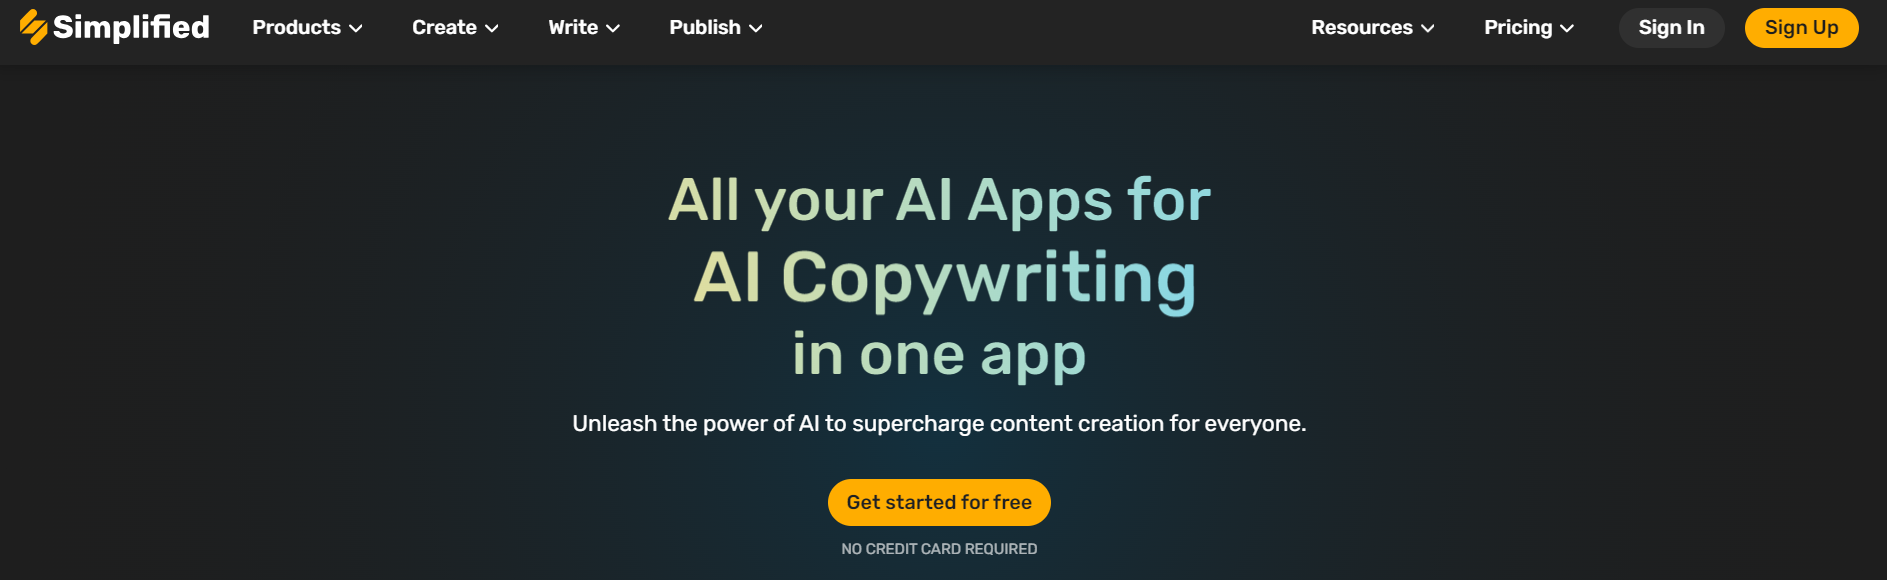 Simplified: AI Content Creation Tool